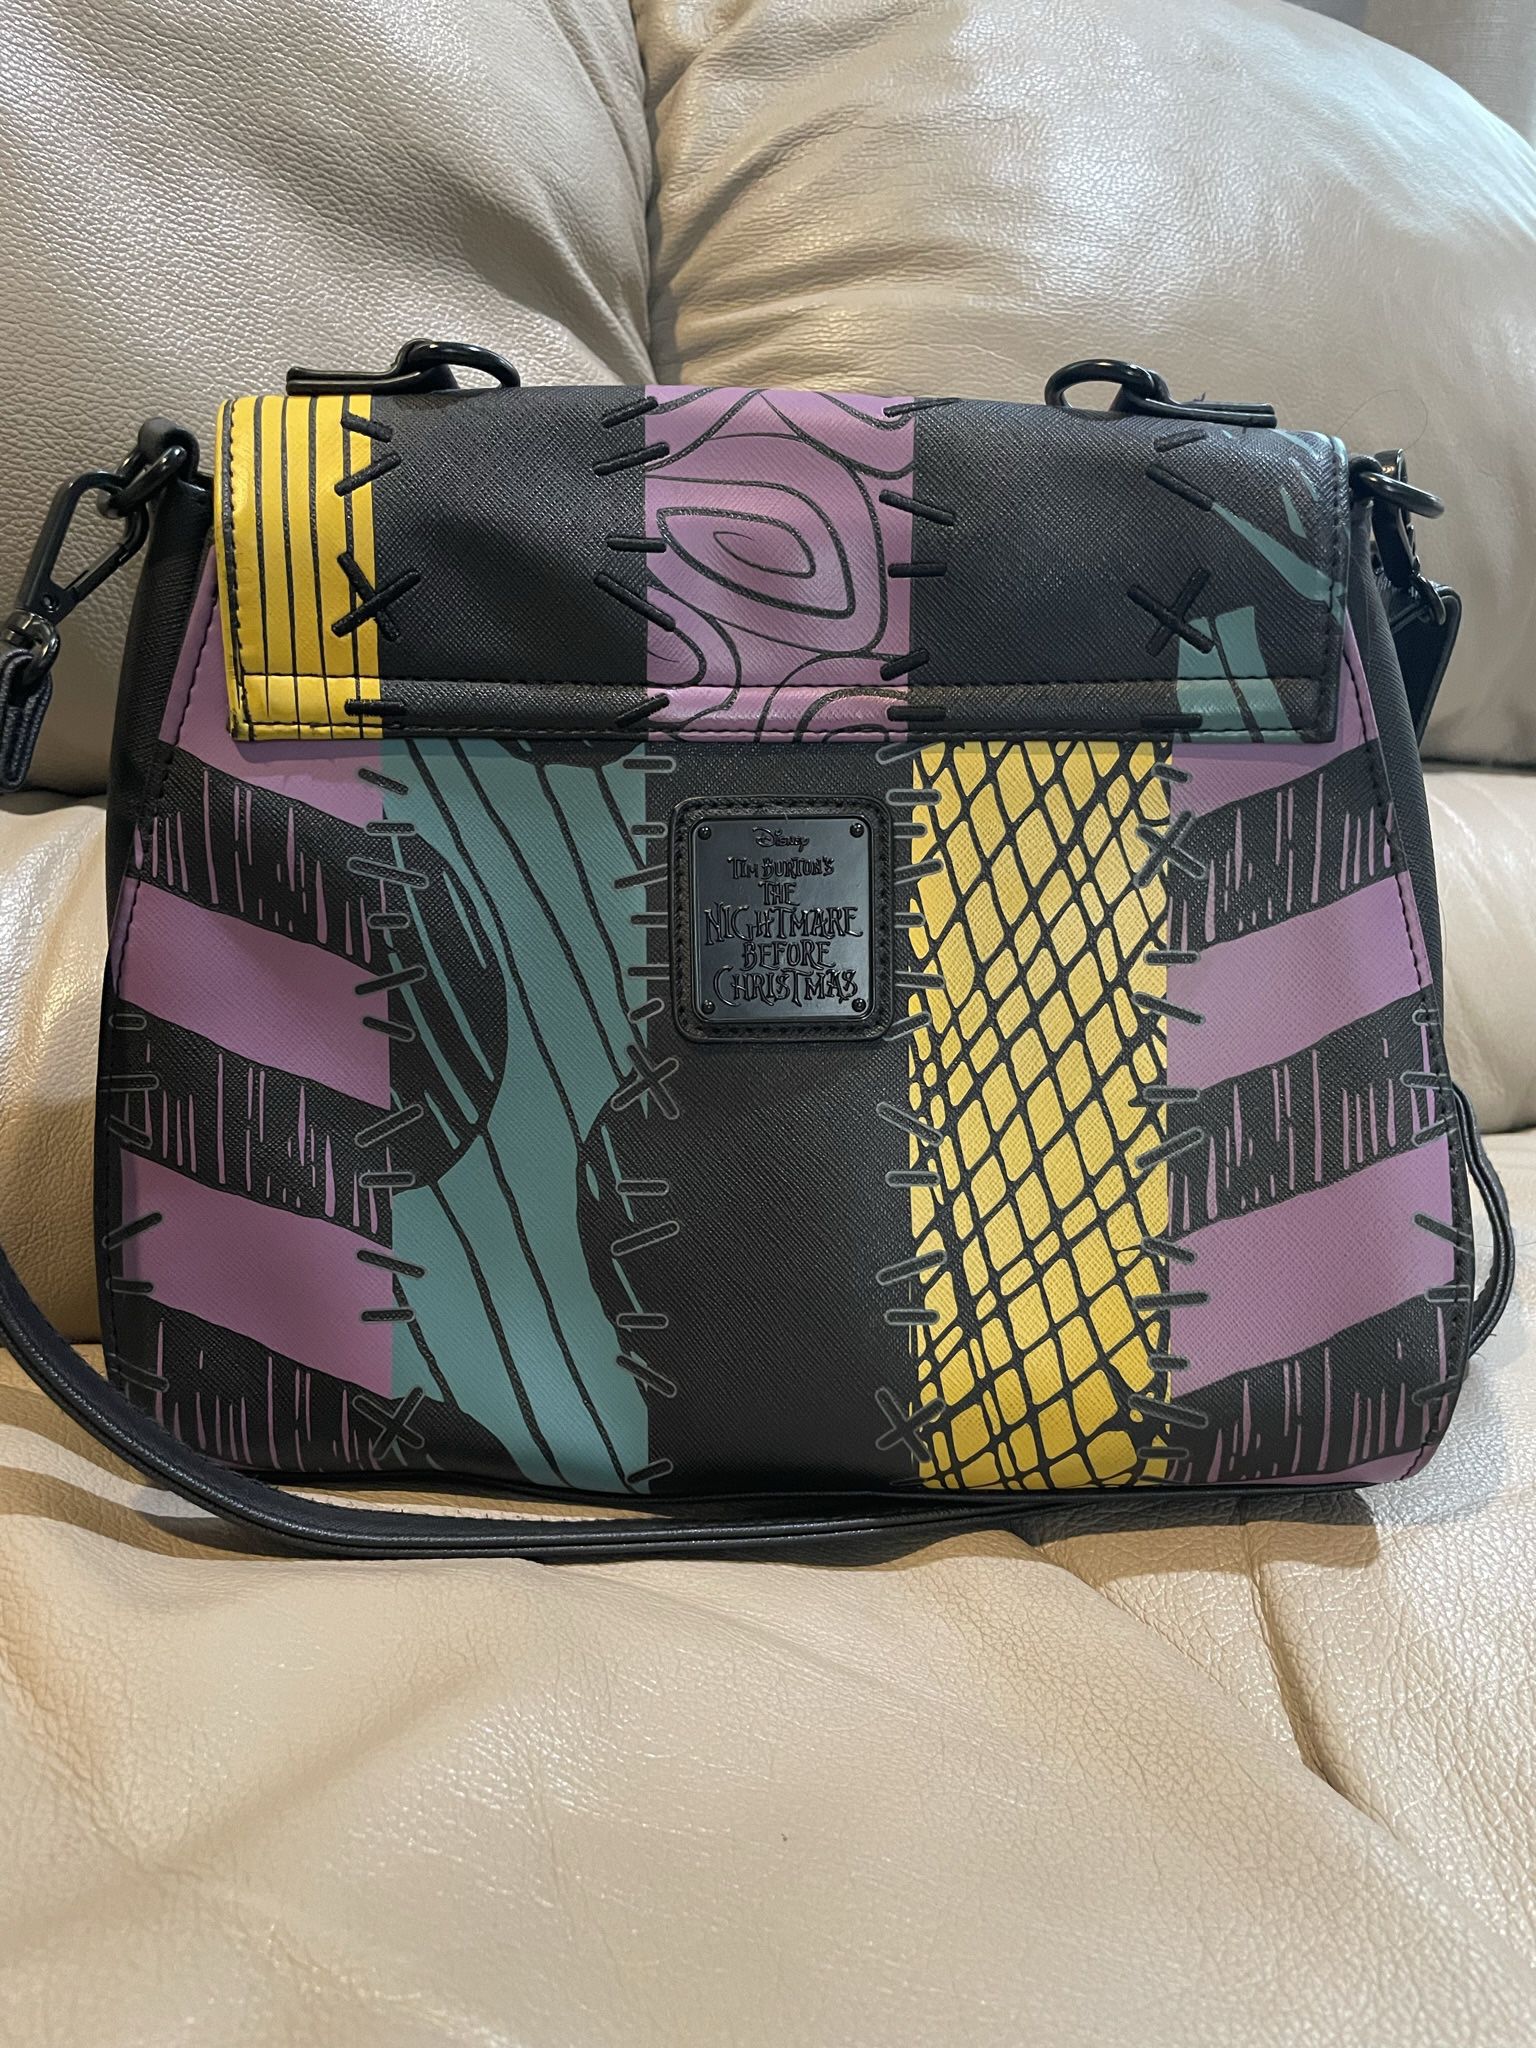 Stoney Clover Cross Body Bag Pink for Sale in Port St. Lucie, FL - OfferUp